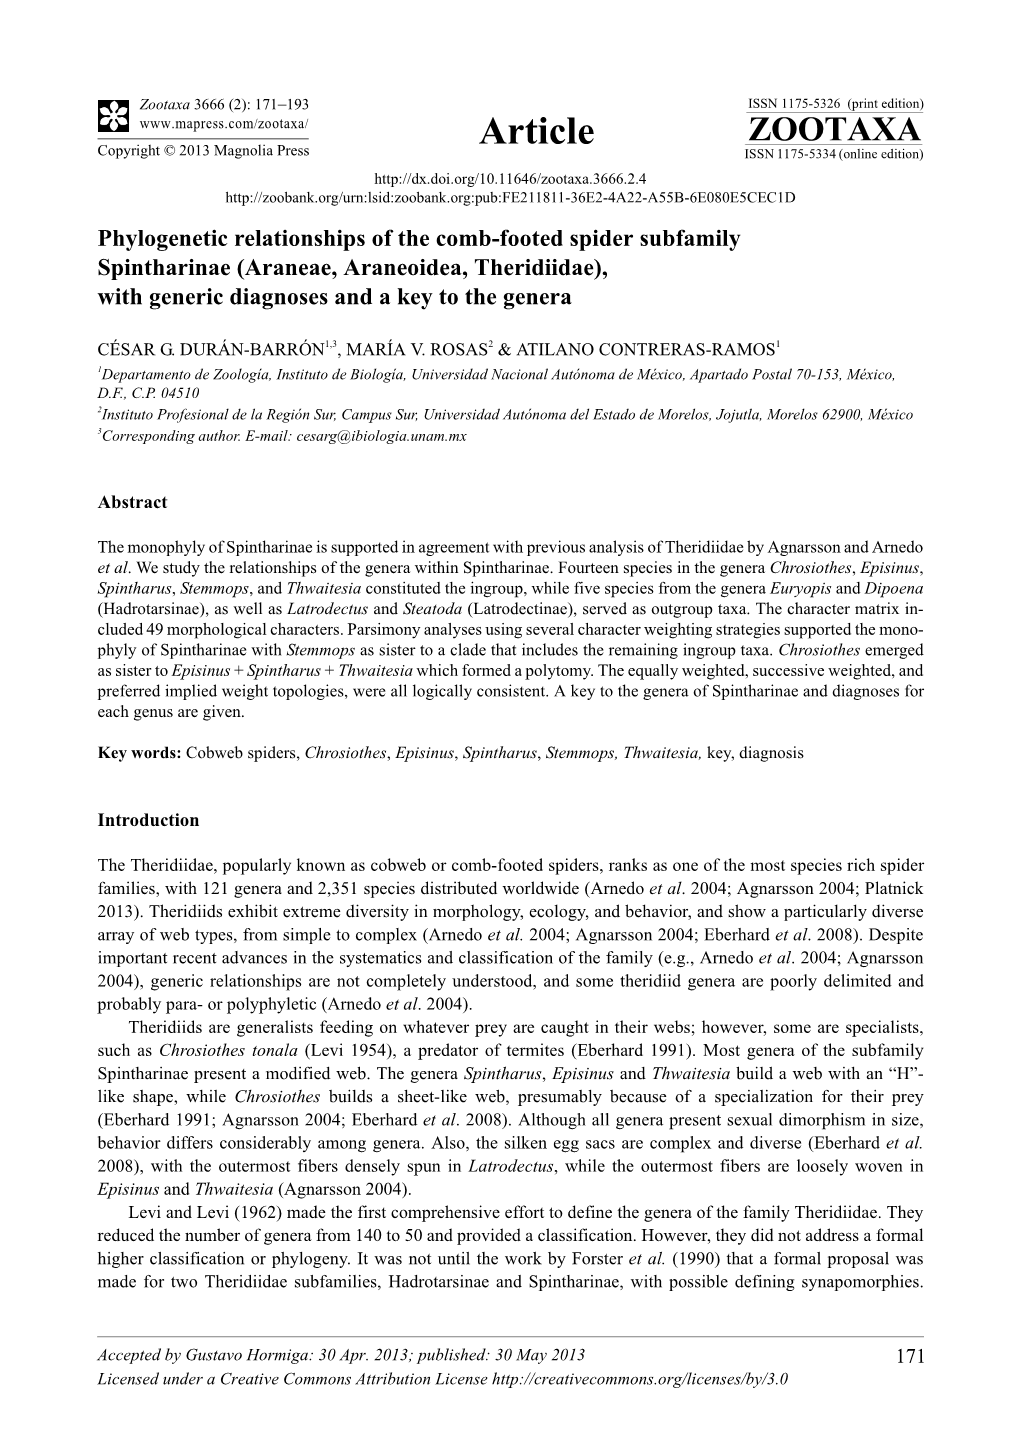 Phylogenetic Relationships of the Comb-Footed Spider Subfamily Spintharinae (Araneae, Araneoidea, Theridiidae), with Generic Diagnoses and a Key to the Genera